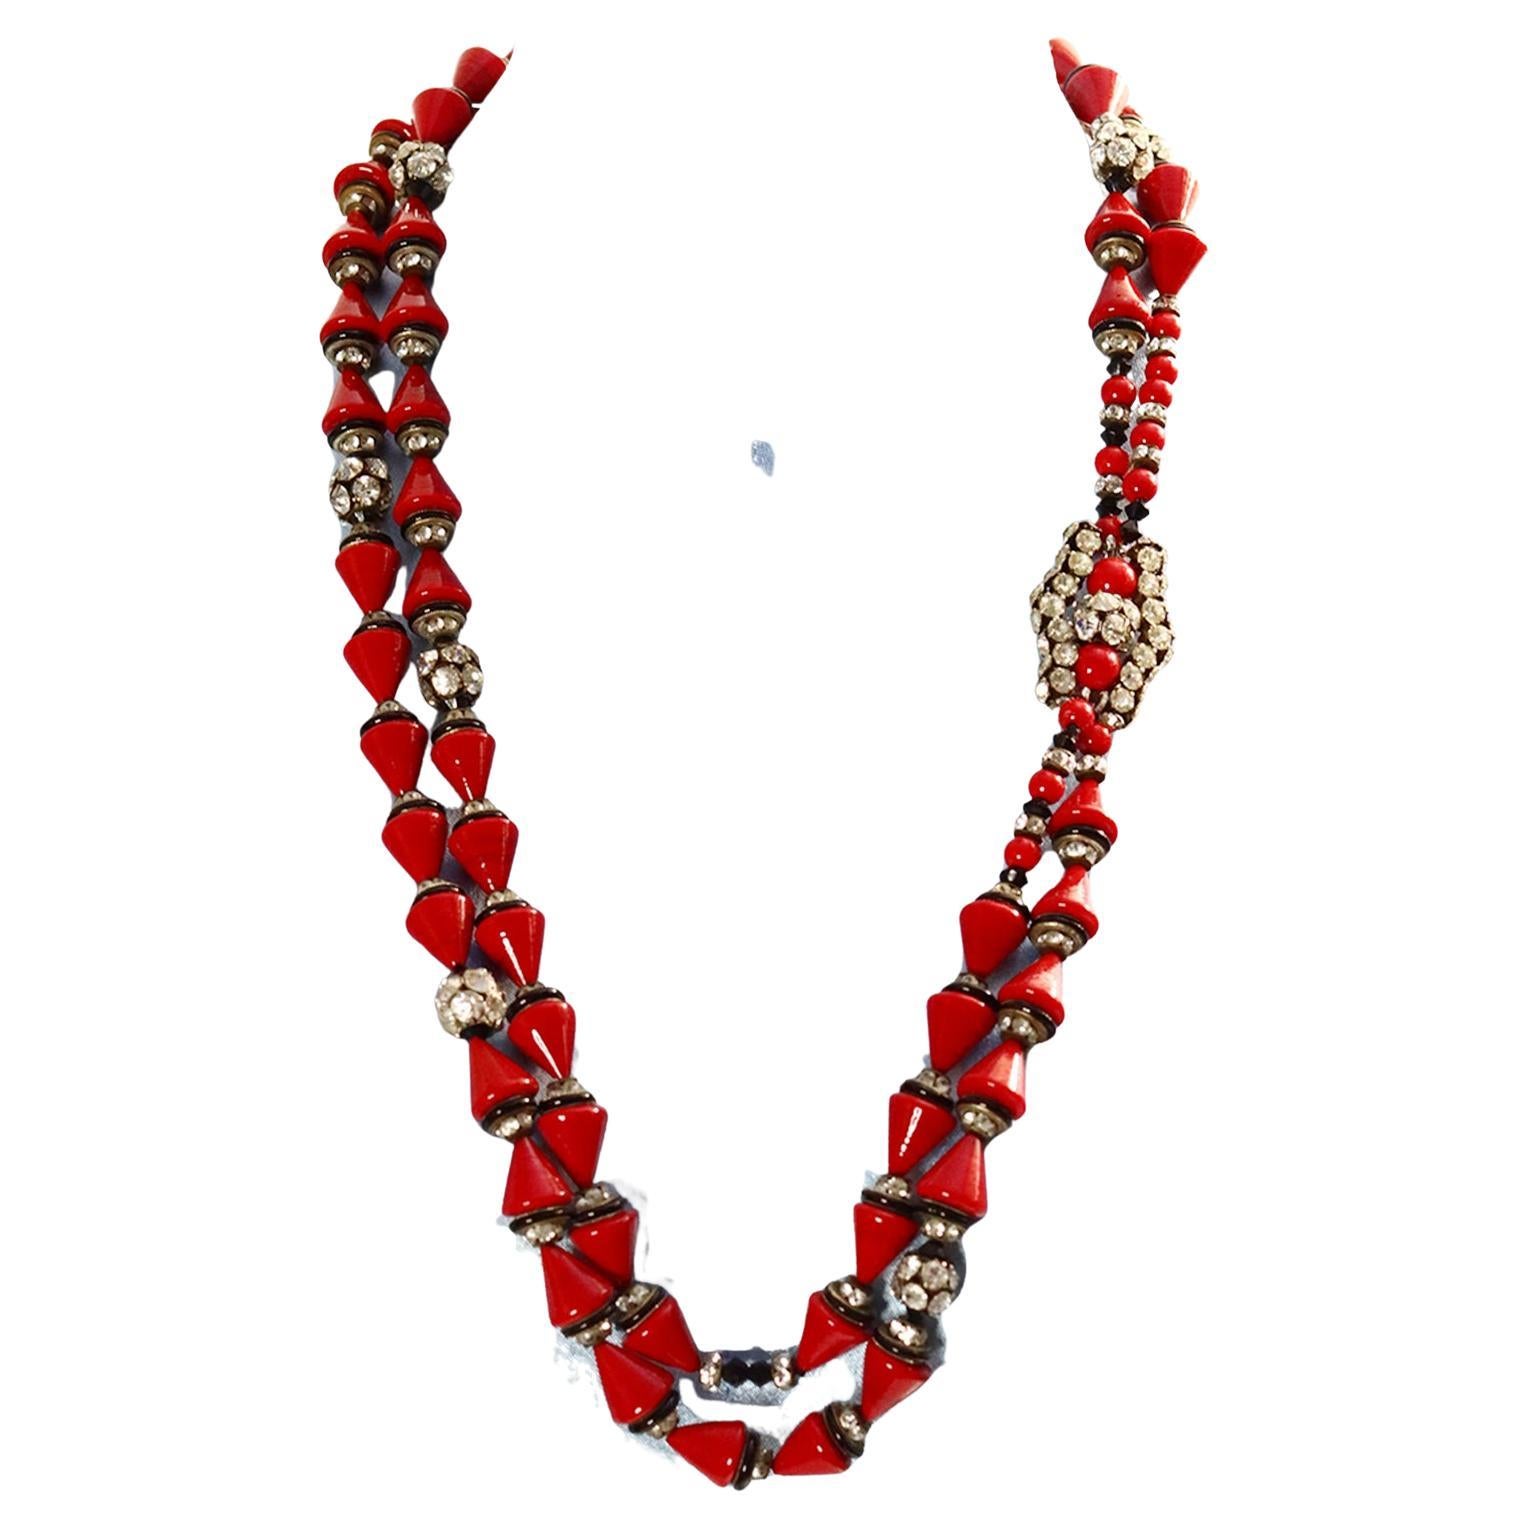 Vintage French Red Beaded With Rondelles Gold and Black Necklace Circa 1960s